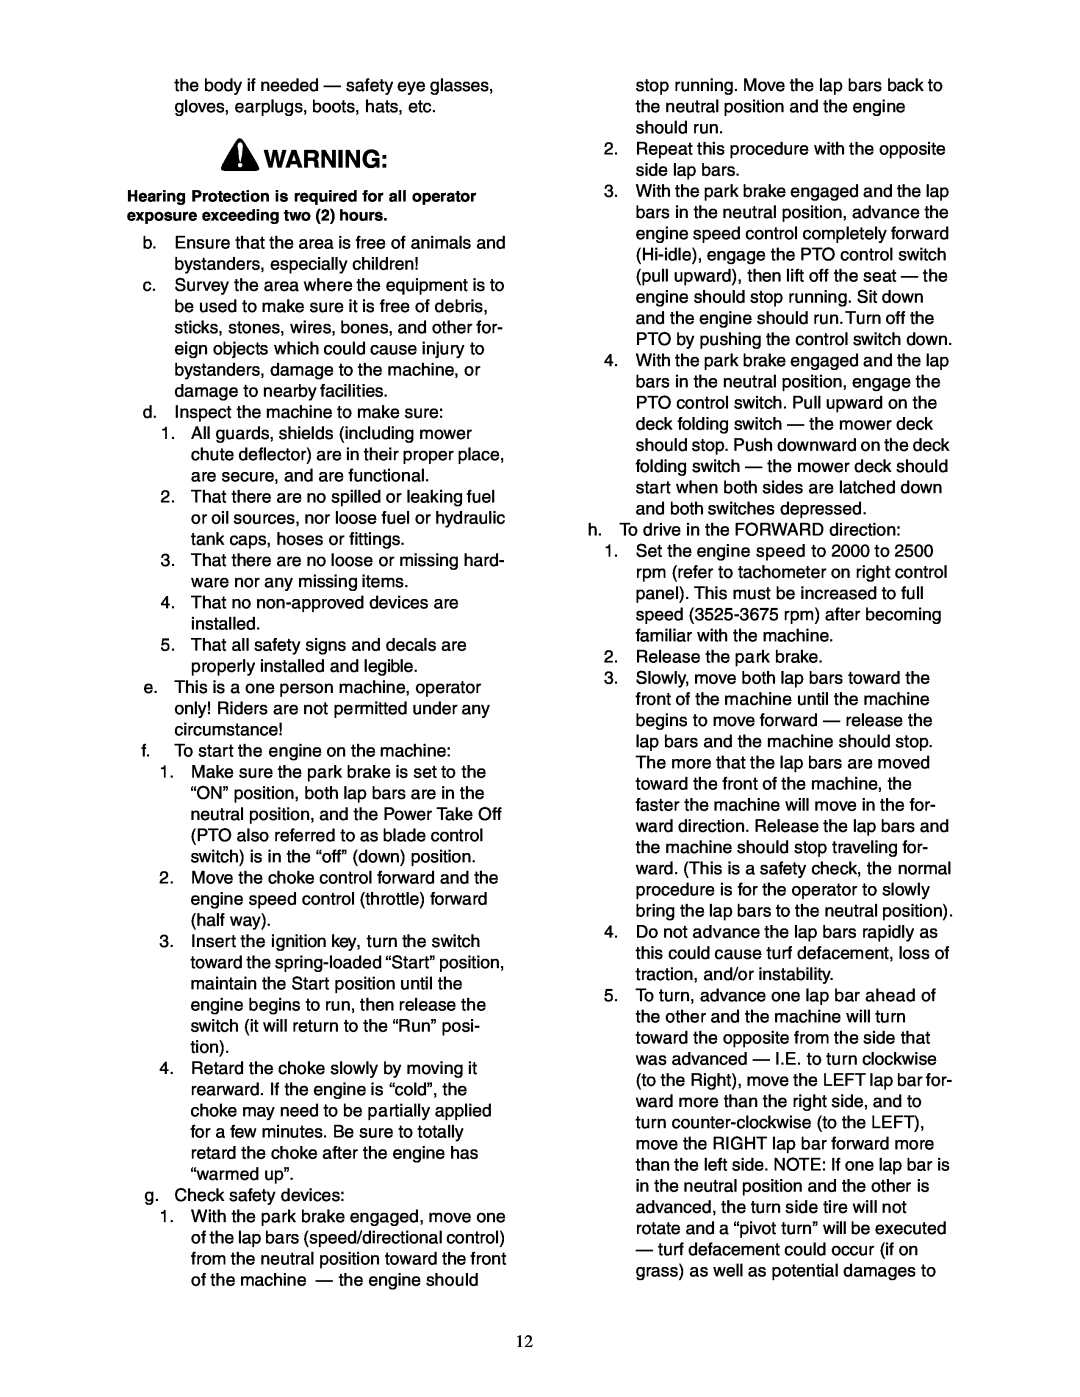 Cub Cadet Z - Wing 48 service manual d.Inspect the machine to make sure 